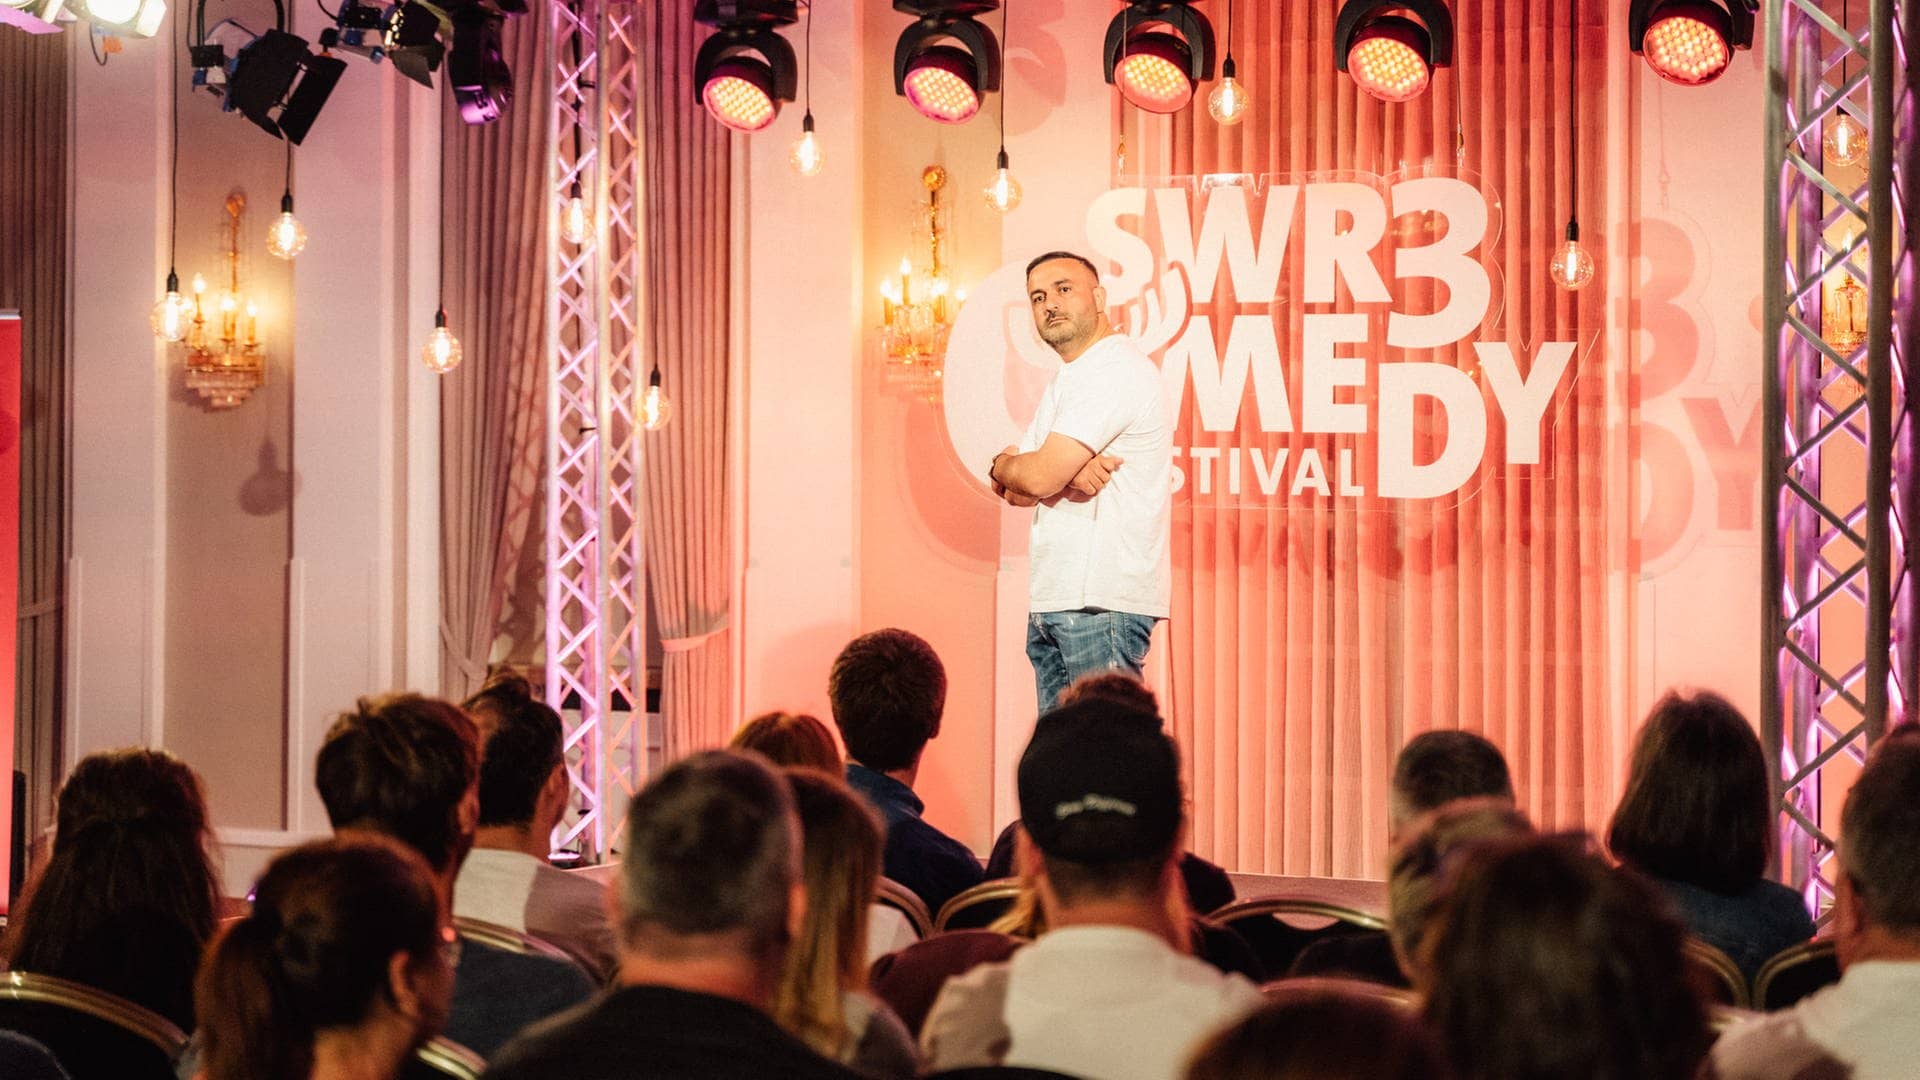 SWR3 Comedy Festival 2022 New Comedians am Samstag